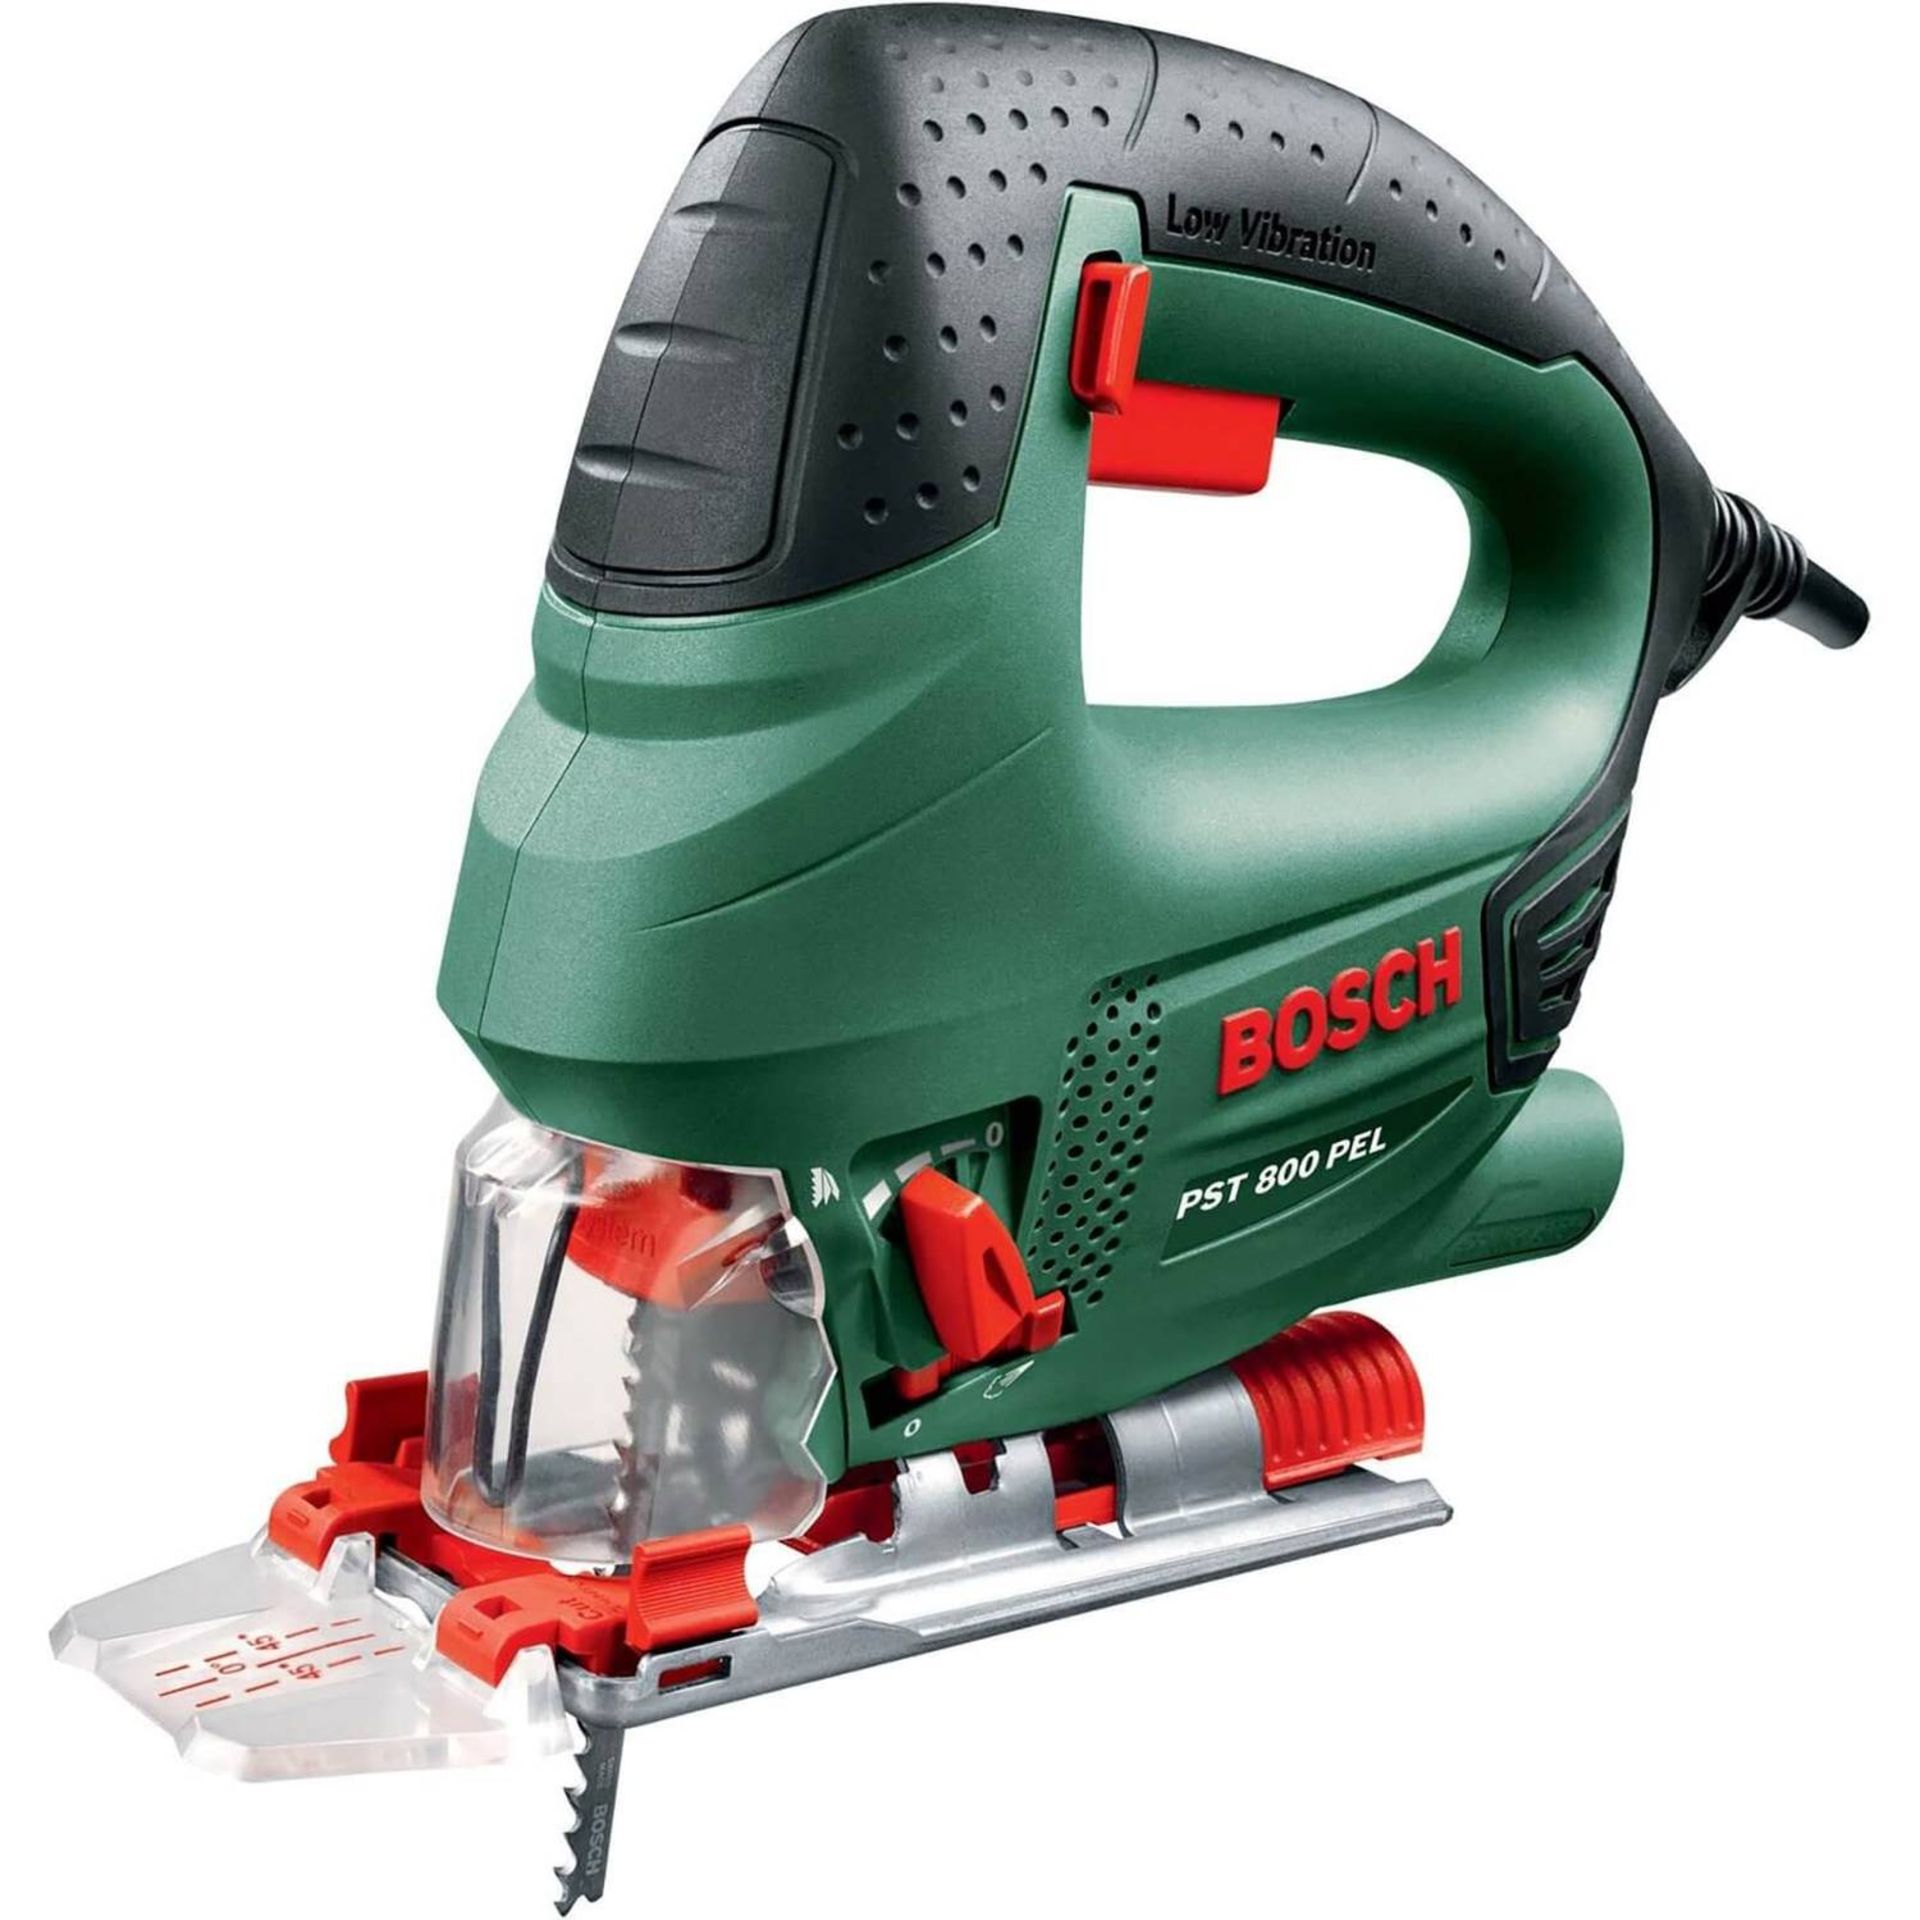 (R15C) 2x Bosch Jigsaw Items. 1x PST 700 E. 1x PST 800 PEL. (Both Items Have Carry Case). Combine - Image 2 of 3